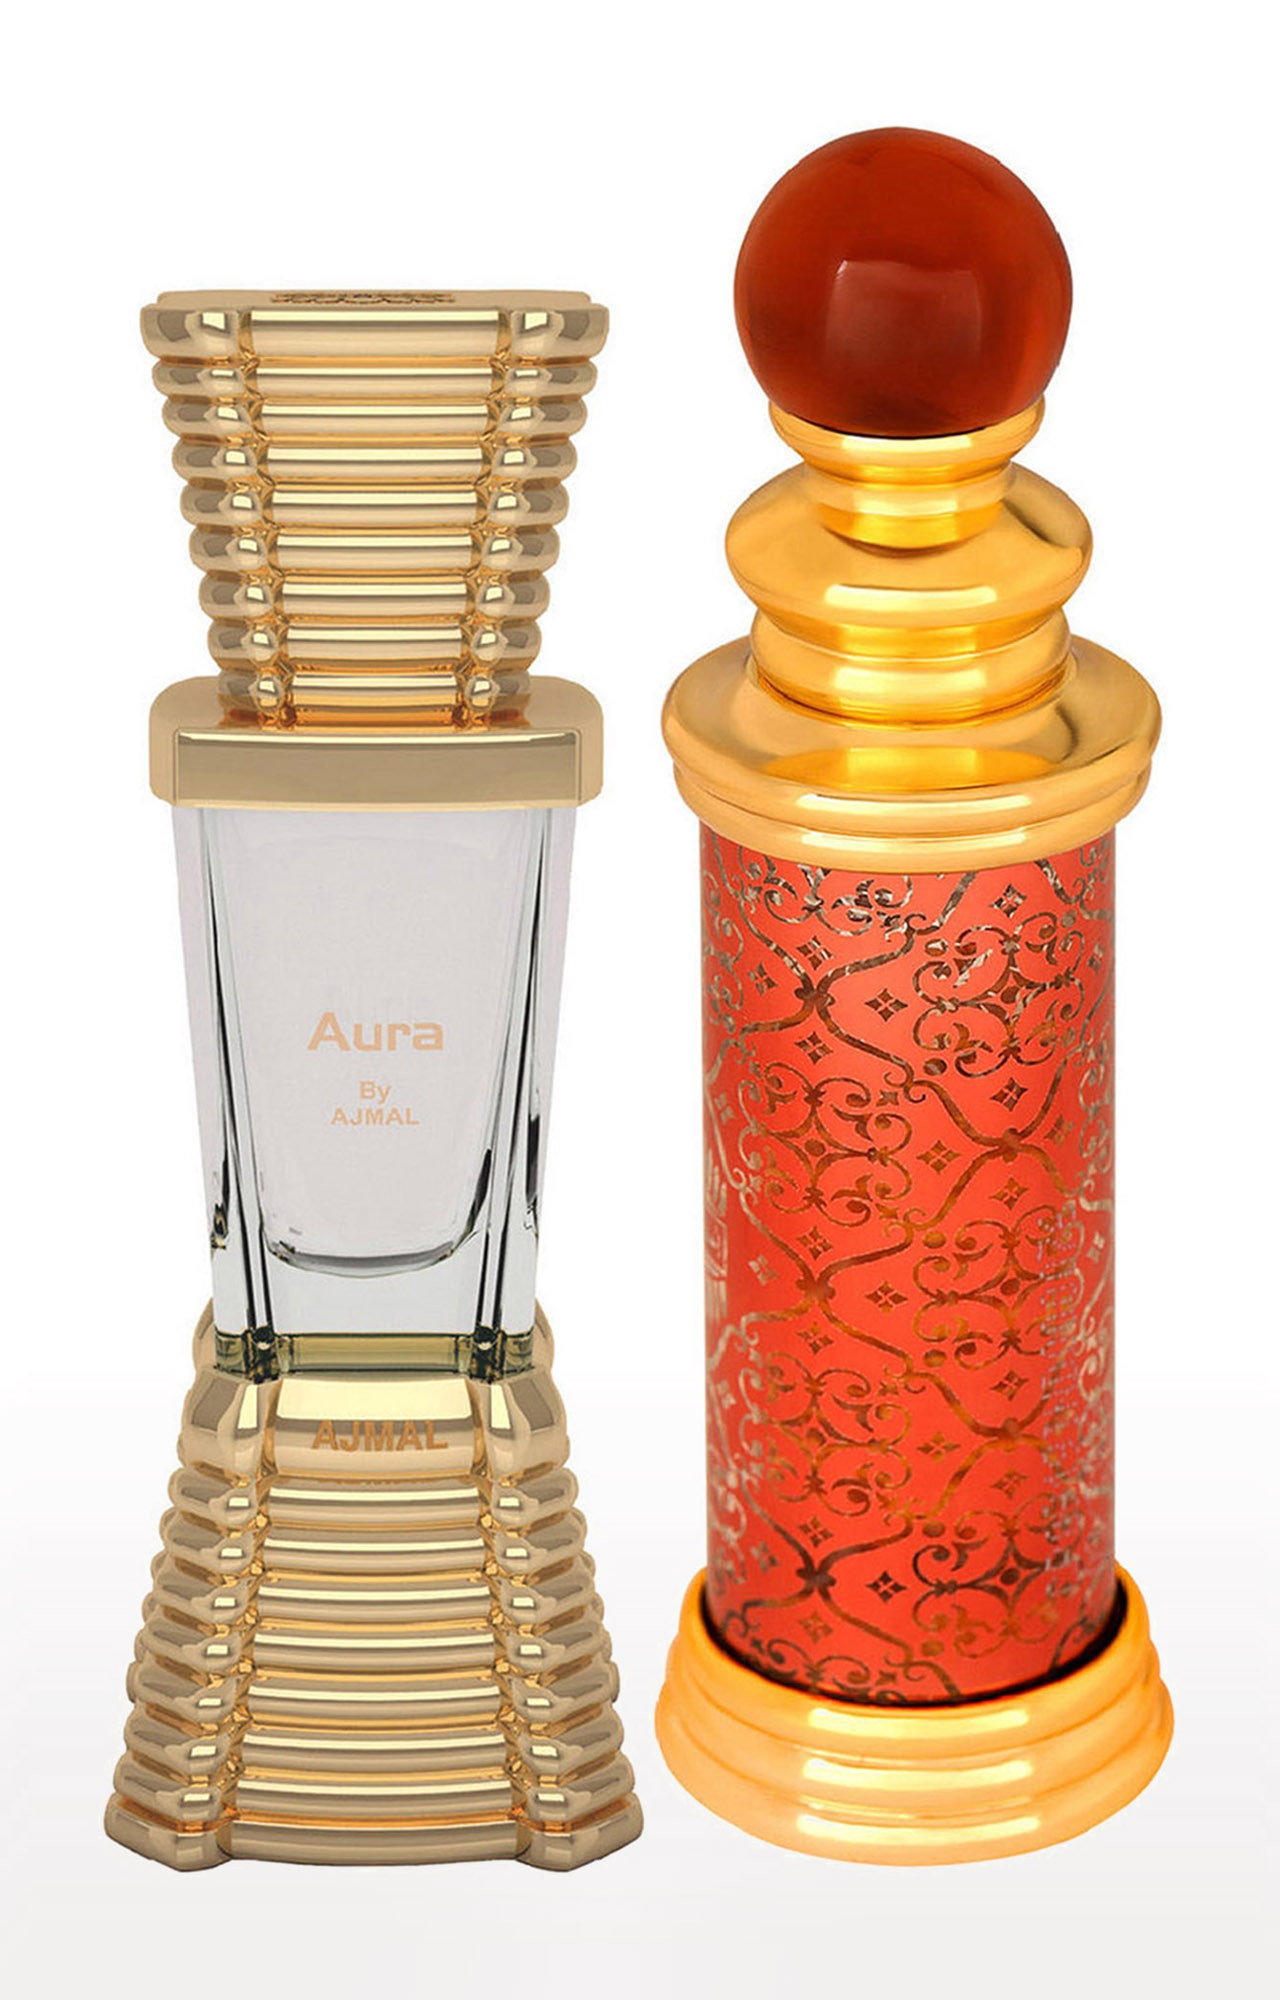 Ajmal | Ajmal Aura Concentrated Perfume Oil Alcohol-free Attar 10ml for Unisex and Classic Oud Concentrated Perfume Oil Oudh Alcohol-free Attar 10ml for Unisex 0